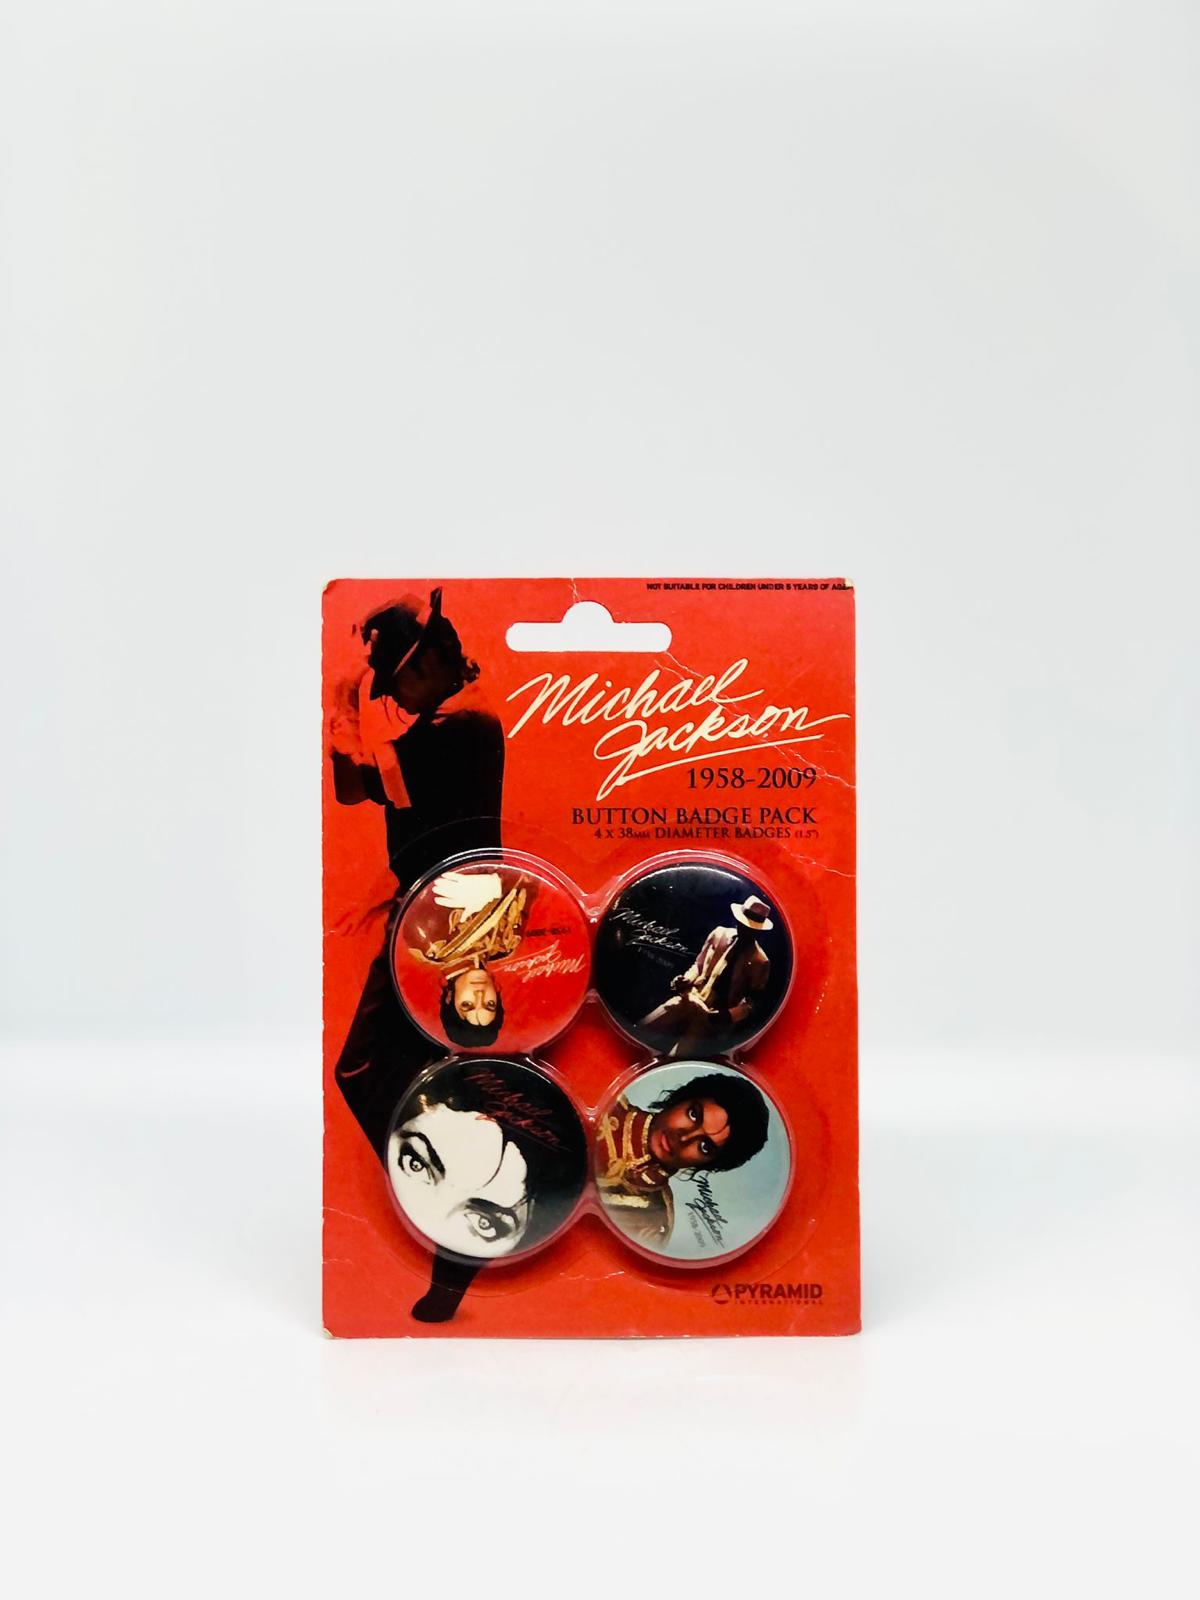 Rare Michael Jackson 1958-2009 Button Badge Pack Collectors MJ - Image 2 of 5